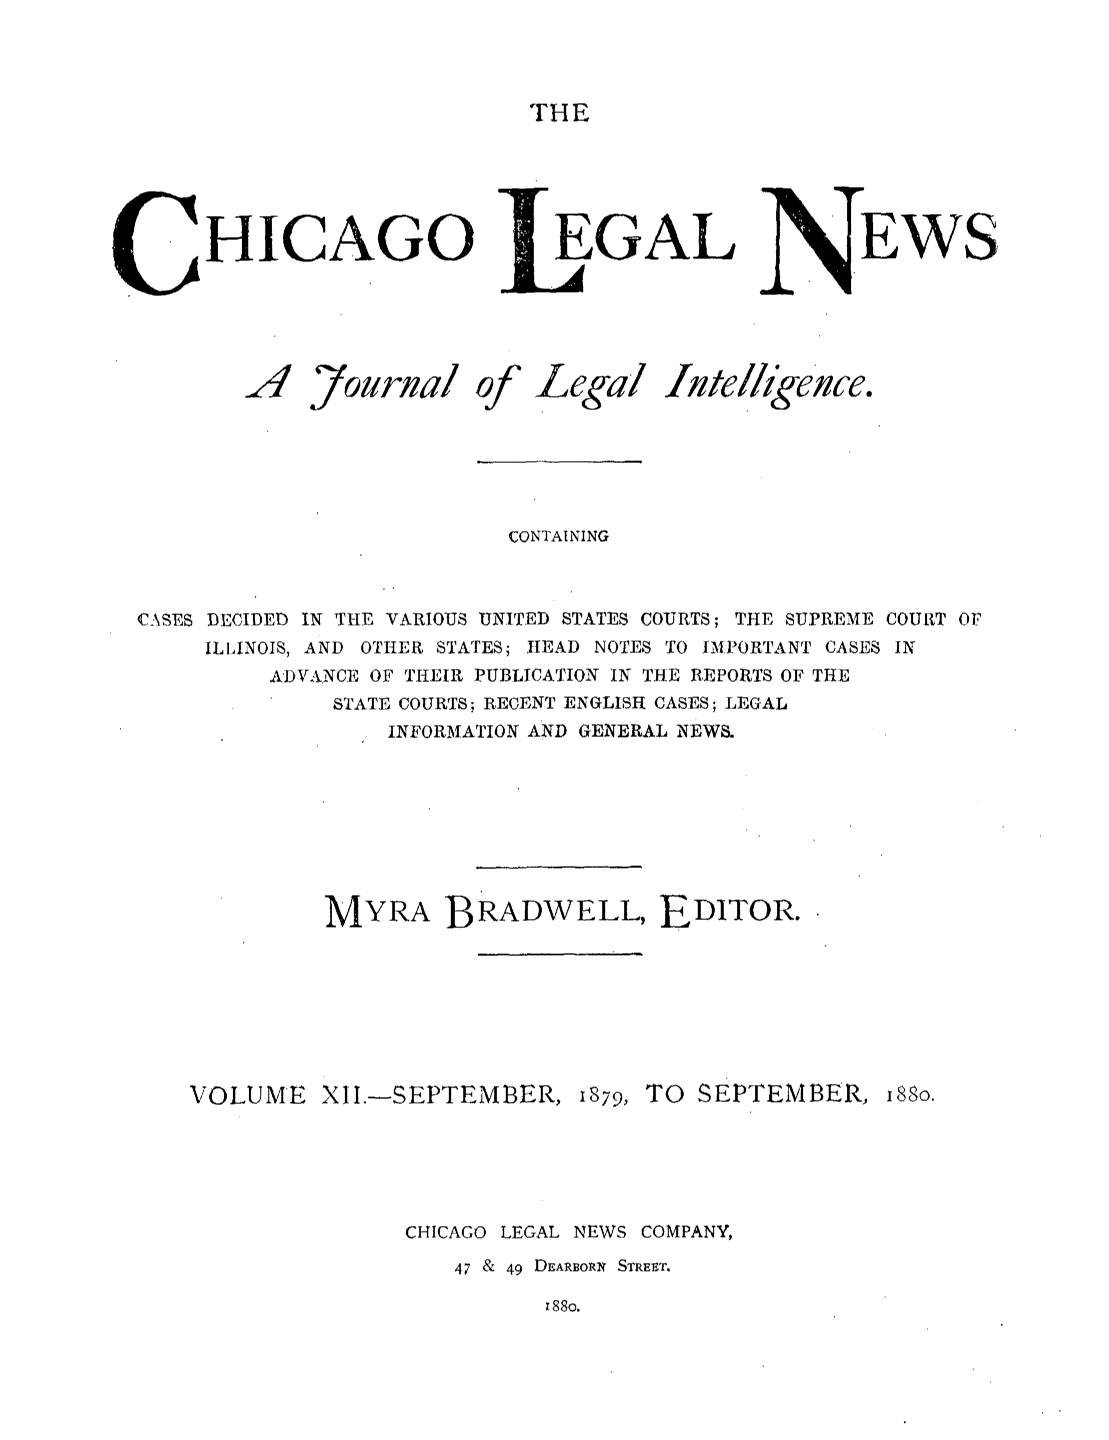 handle is hein.journals/chiclene12 and id is 1 raw text is: THEHICAGO JA Yournal ofEGALLegal luteEWSlhgenee.CONTAININGCASES DECIDED IN THE VARIOUS UNITED STATES COURTS; THE SUPREME COURT OFILLINOIS, AND OTHER STATES; HEAD NOTES TO IMPORTANT CASES INADVANCE OF THEIR PUBLICATION IN THE REPORTS OF THESTATE COURTS; RECENT ENGLISH CASES; LEGALINFORMATION AND GENERAL NEWSMYRA BRADWELL, EDITOR.VOLUME XII.-SEPTEMBER, 1879, TO SEPTEMBER,isso.CHICAGO LEGAL NEWS COMPANY,47 & 49 DEARBORN STREET.88o.